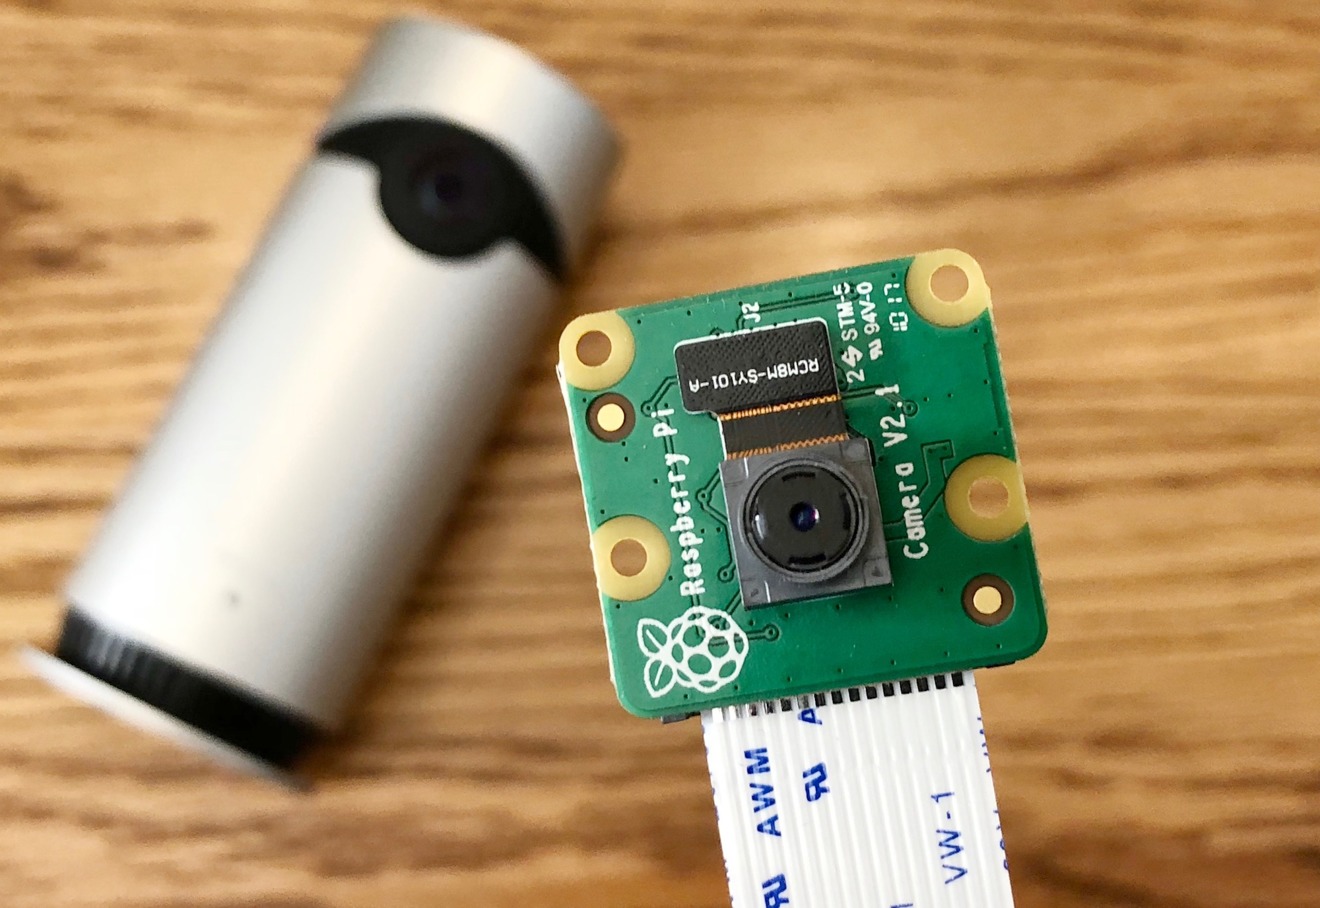 How To Create Your Own Homekit Camera With A Raspberry Pi And